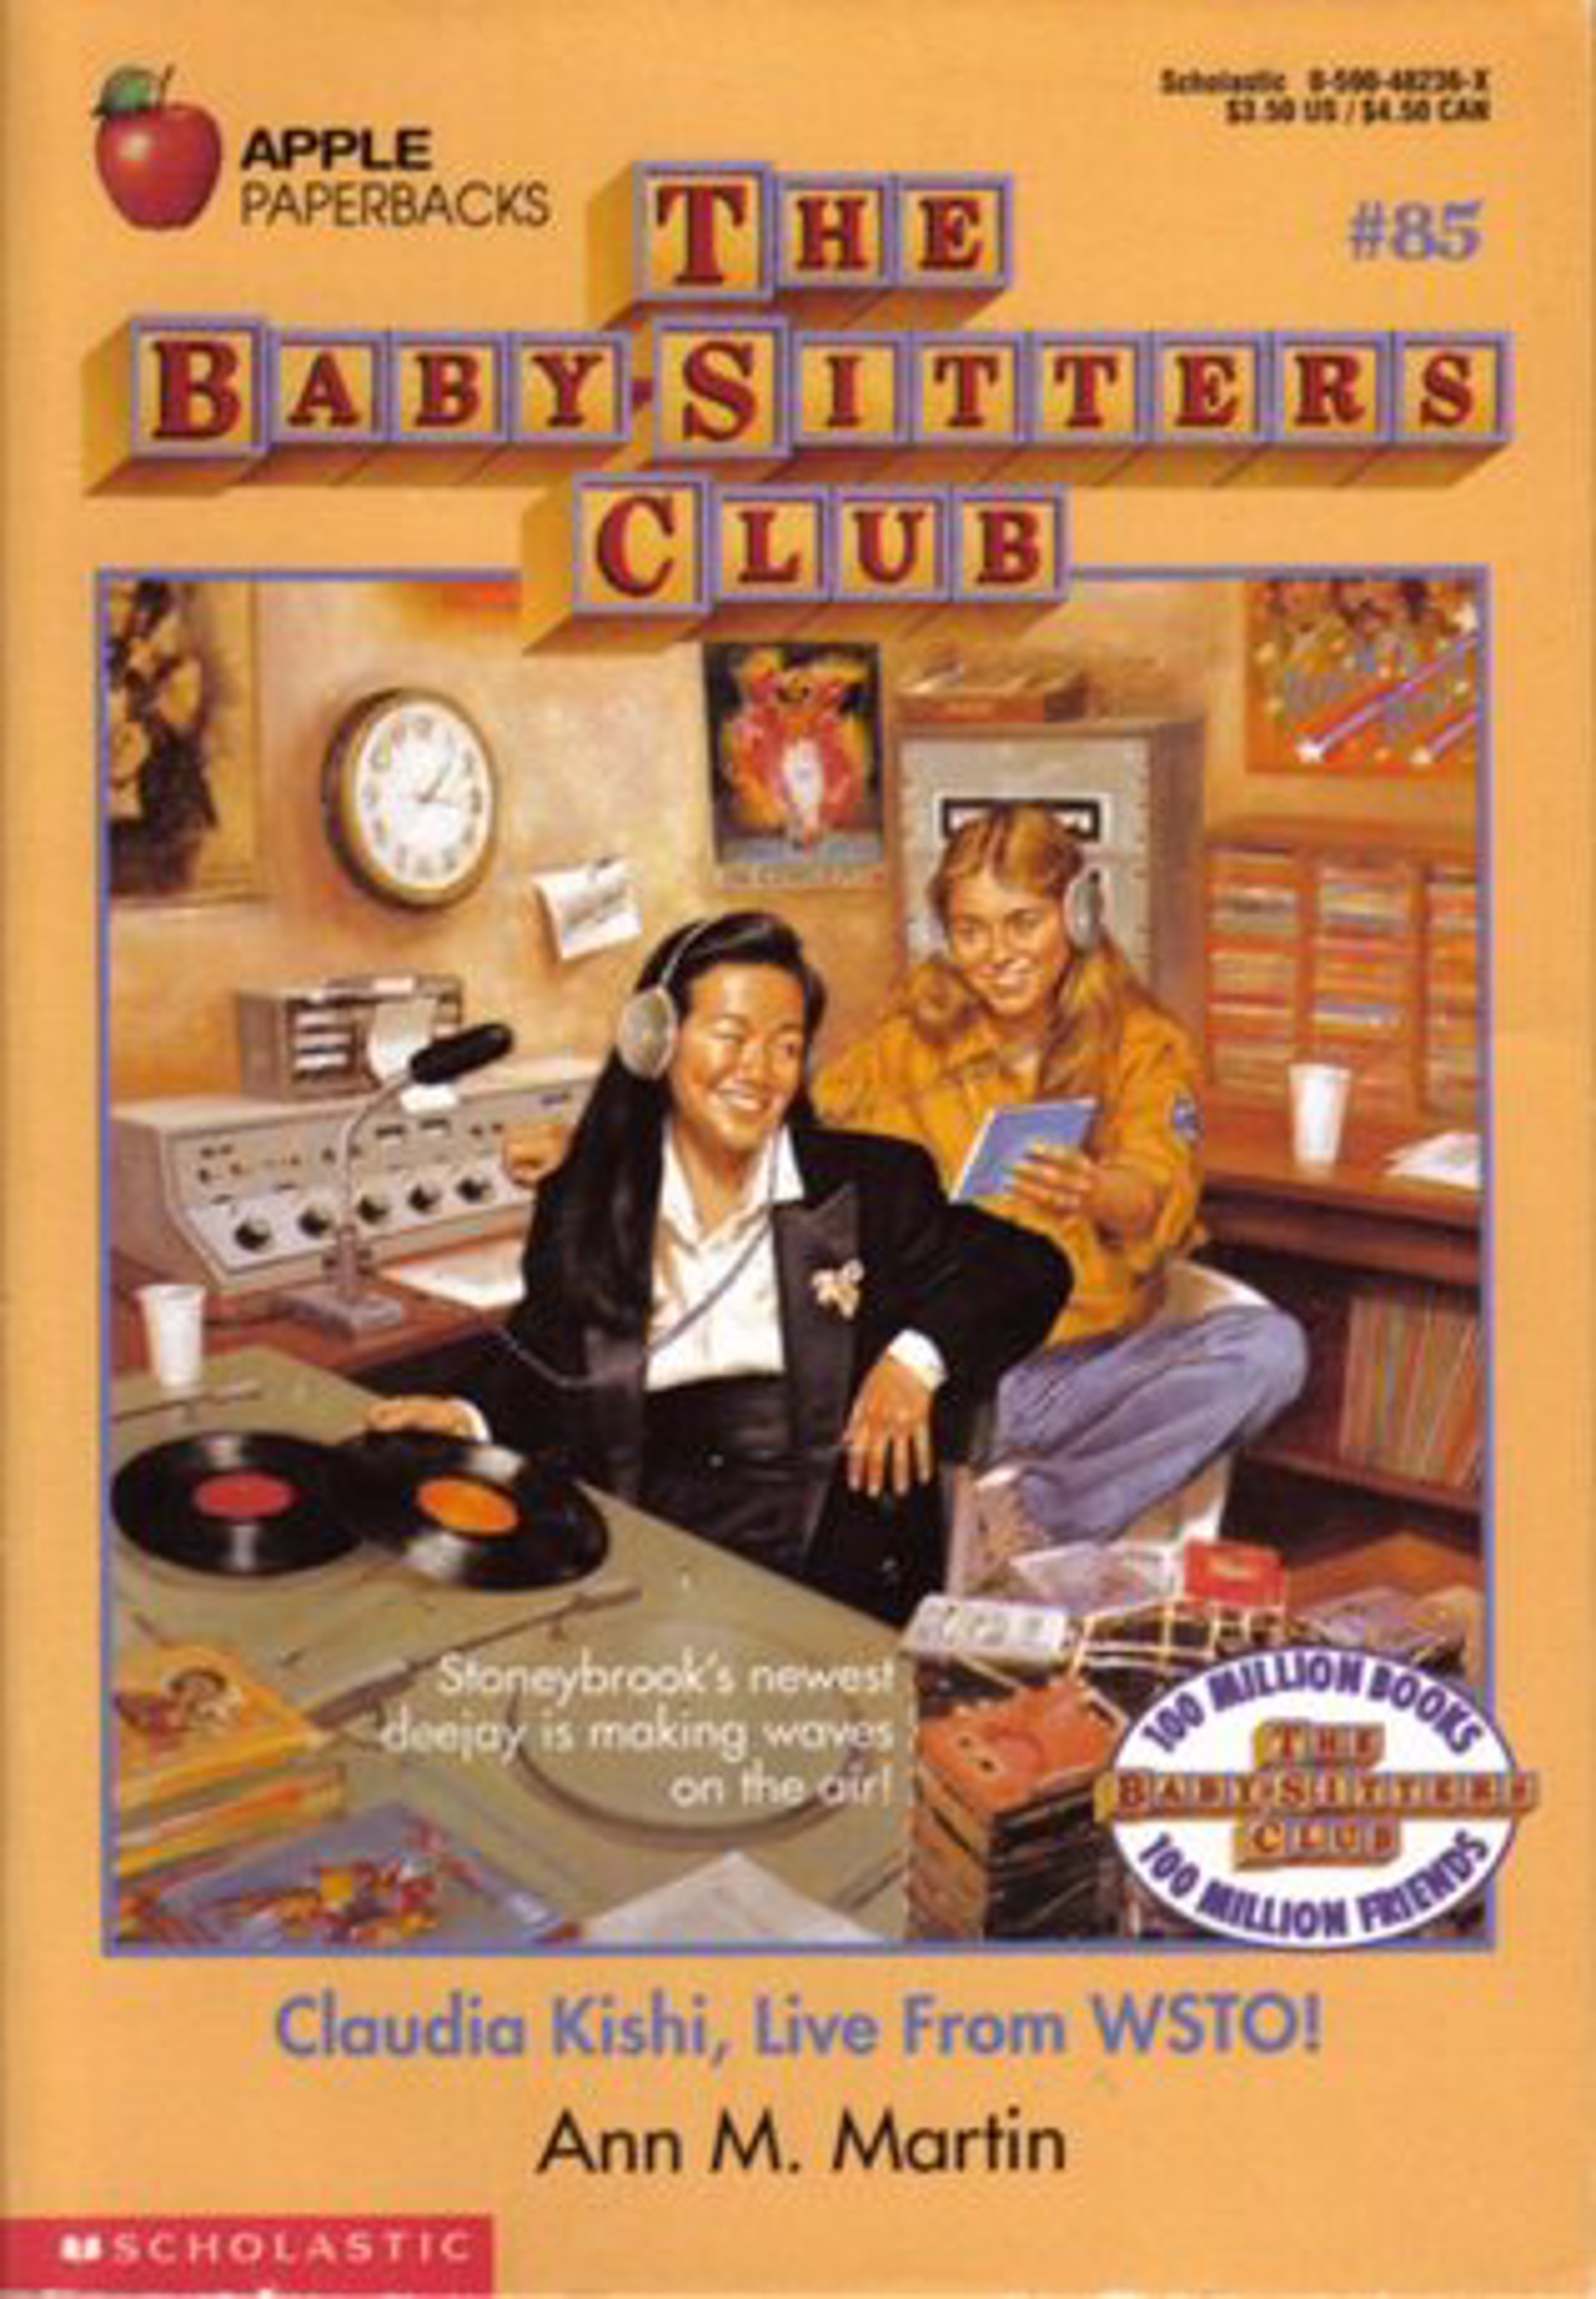 The Babysitter’s Club #85 “Claudia Kishi, Live from WSTO!” by Hodges Soileau